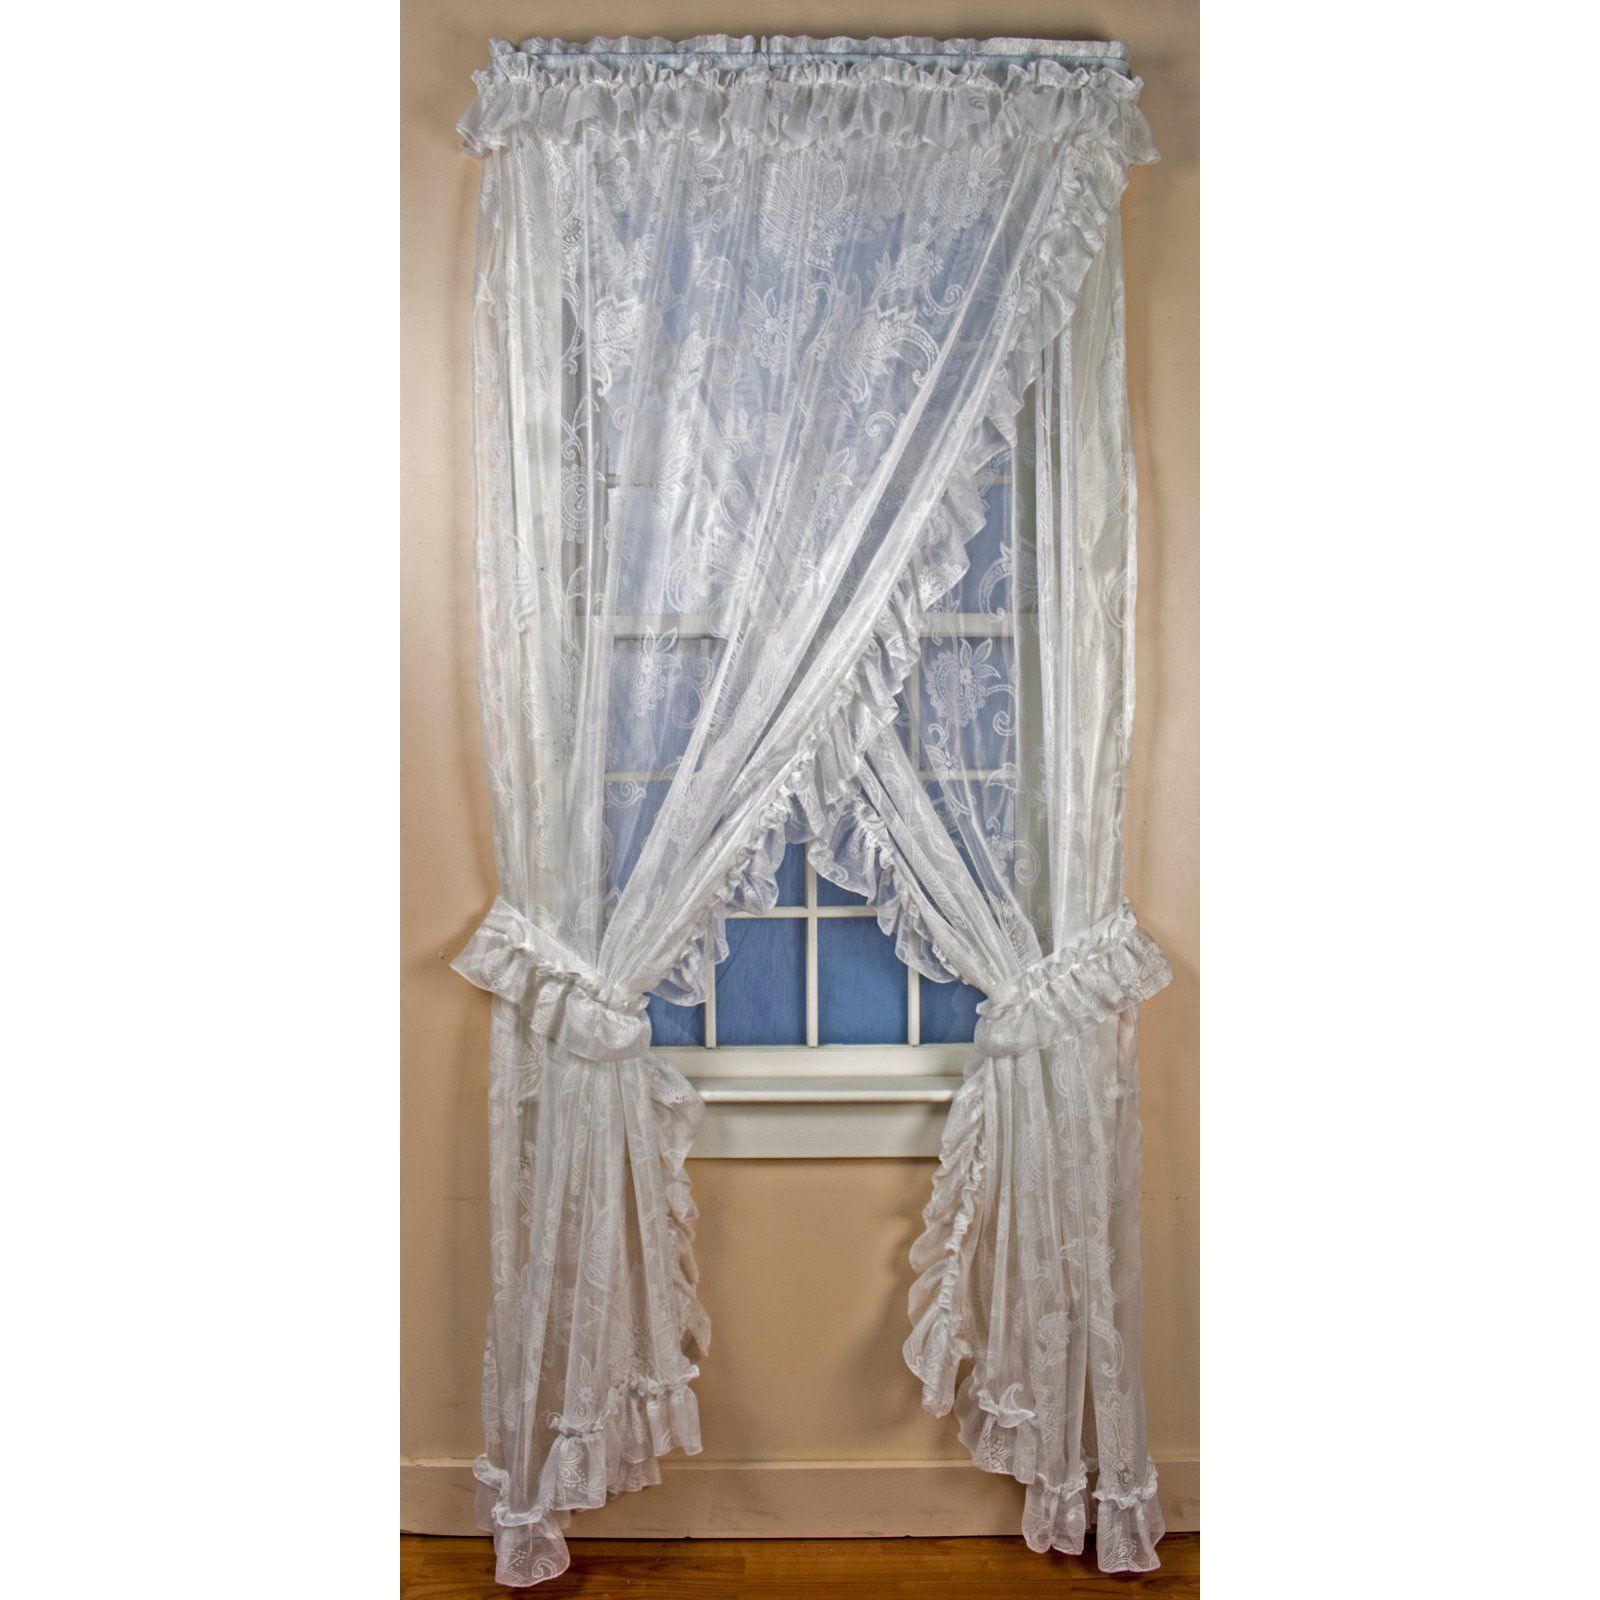 Ellis Curtain Beverly Lace Ruffled Priscilla Curtain Panel Pertaining To Elegant White Priscilla Lace Kitchen Curtain Pieces (View 20 of 20)